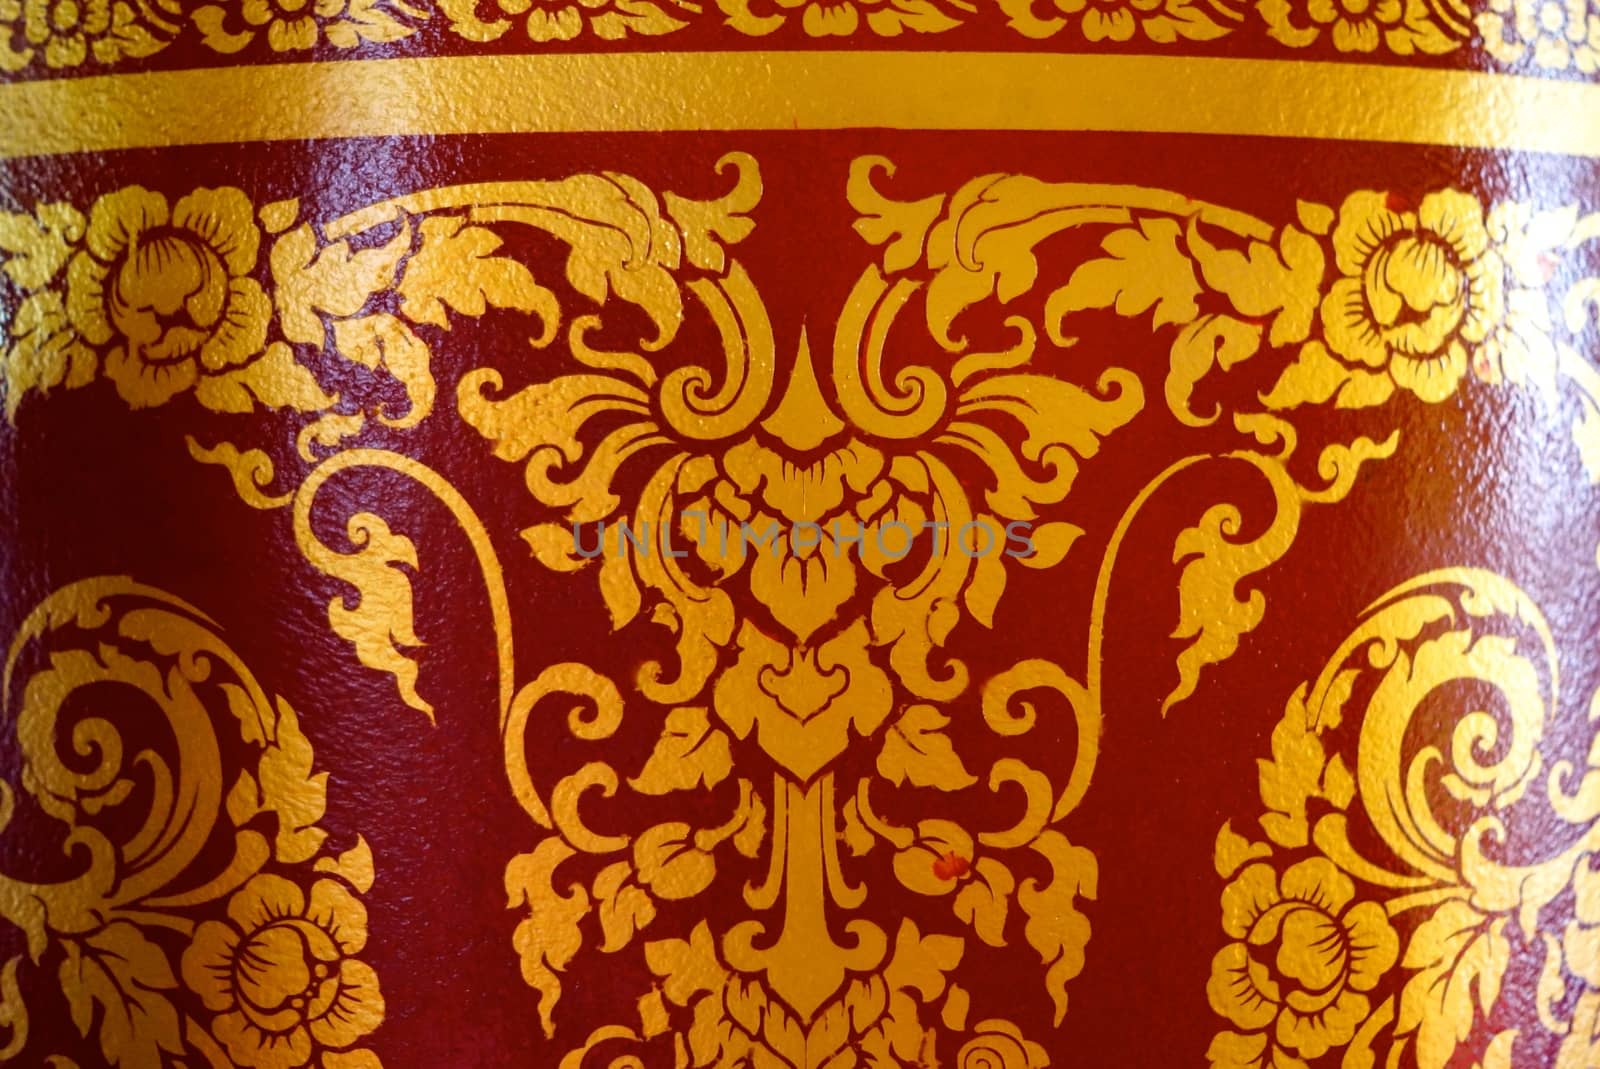 various of thai patterns on temple wall and pillars that  usually present in red,black and gold colour